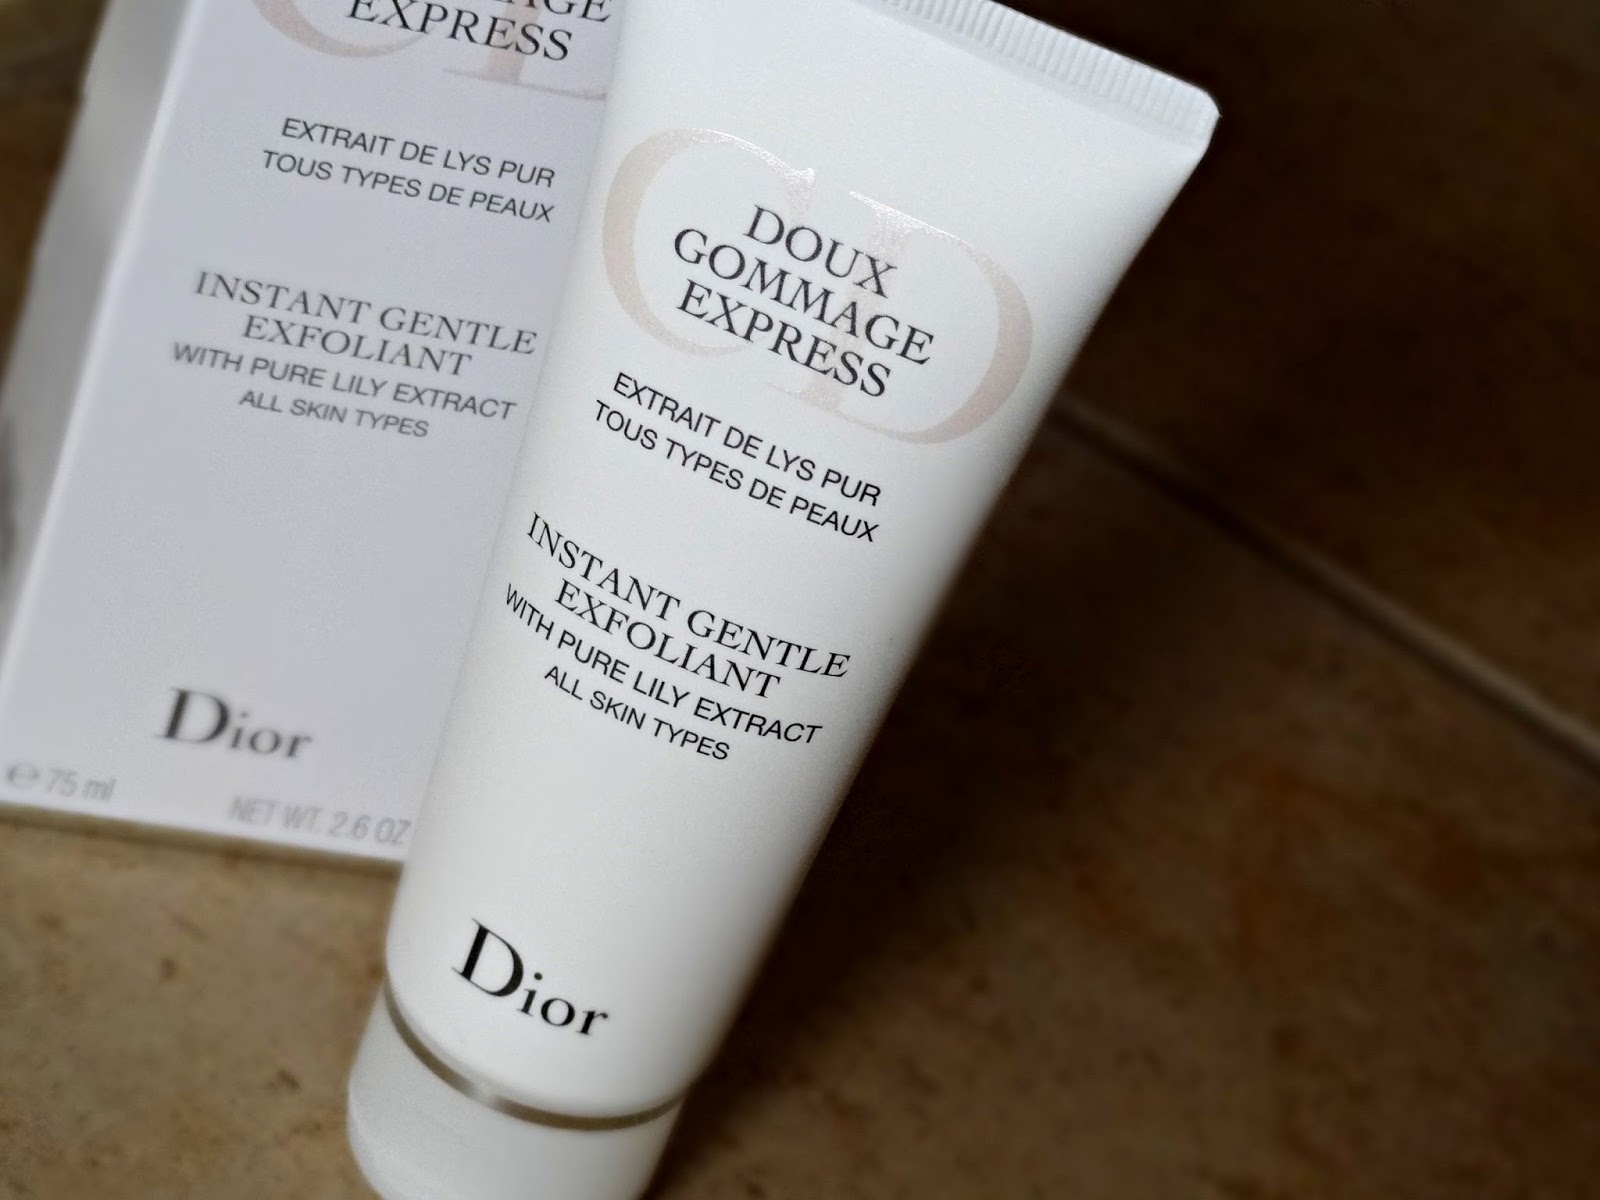 Dior’s Instant Gentle Exfoliant With Pure Lily Extract